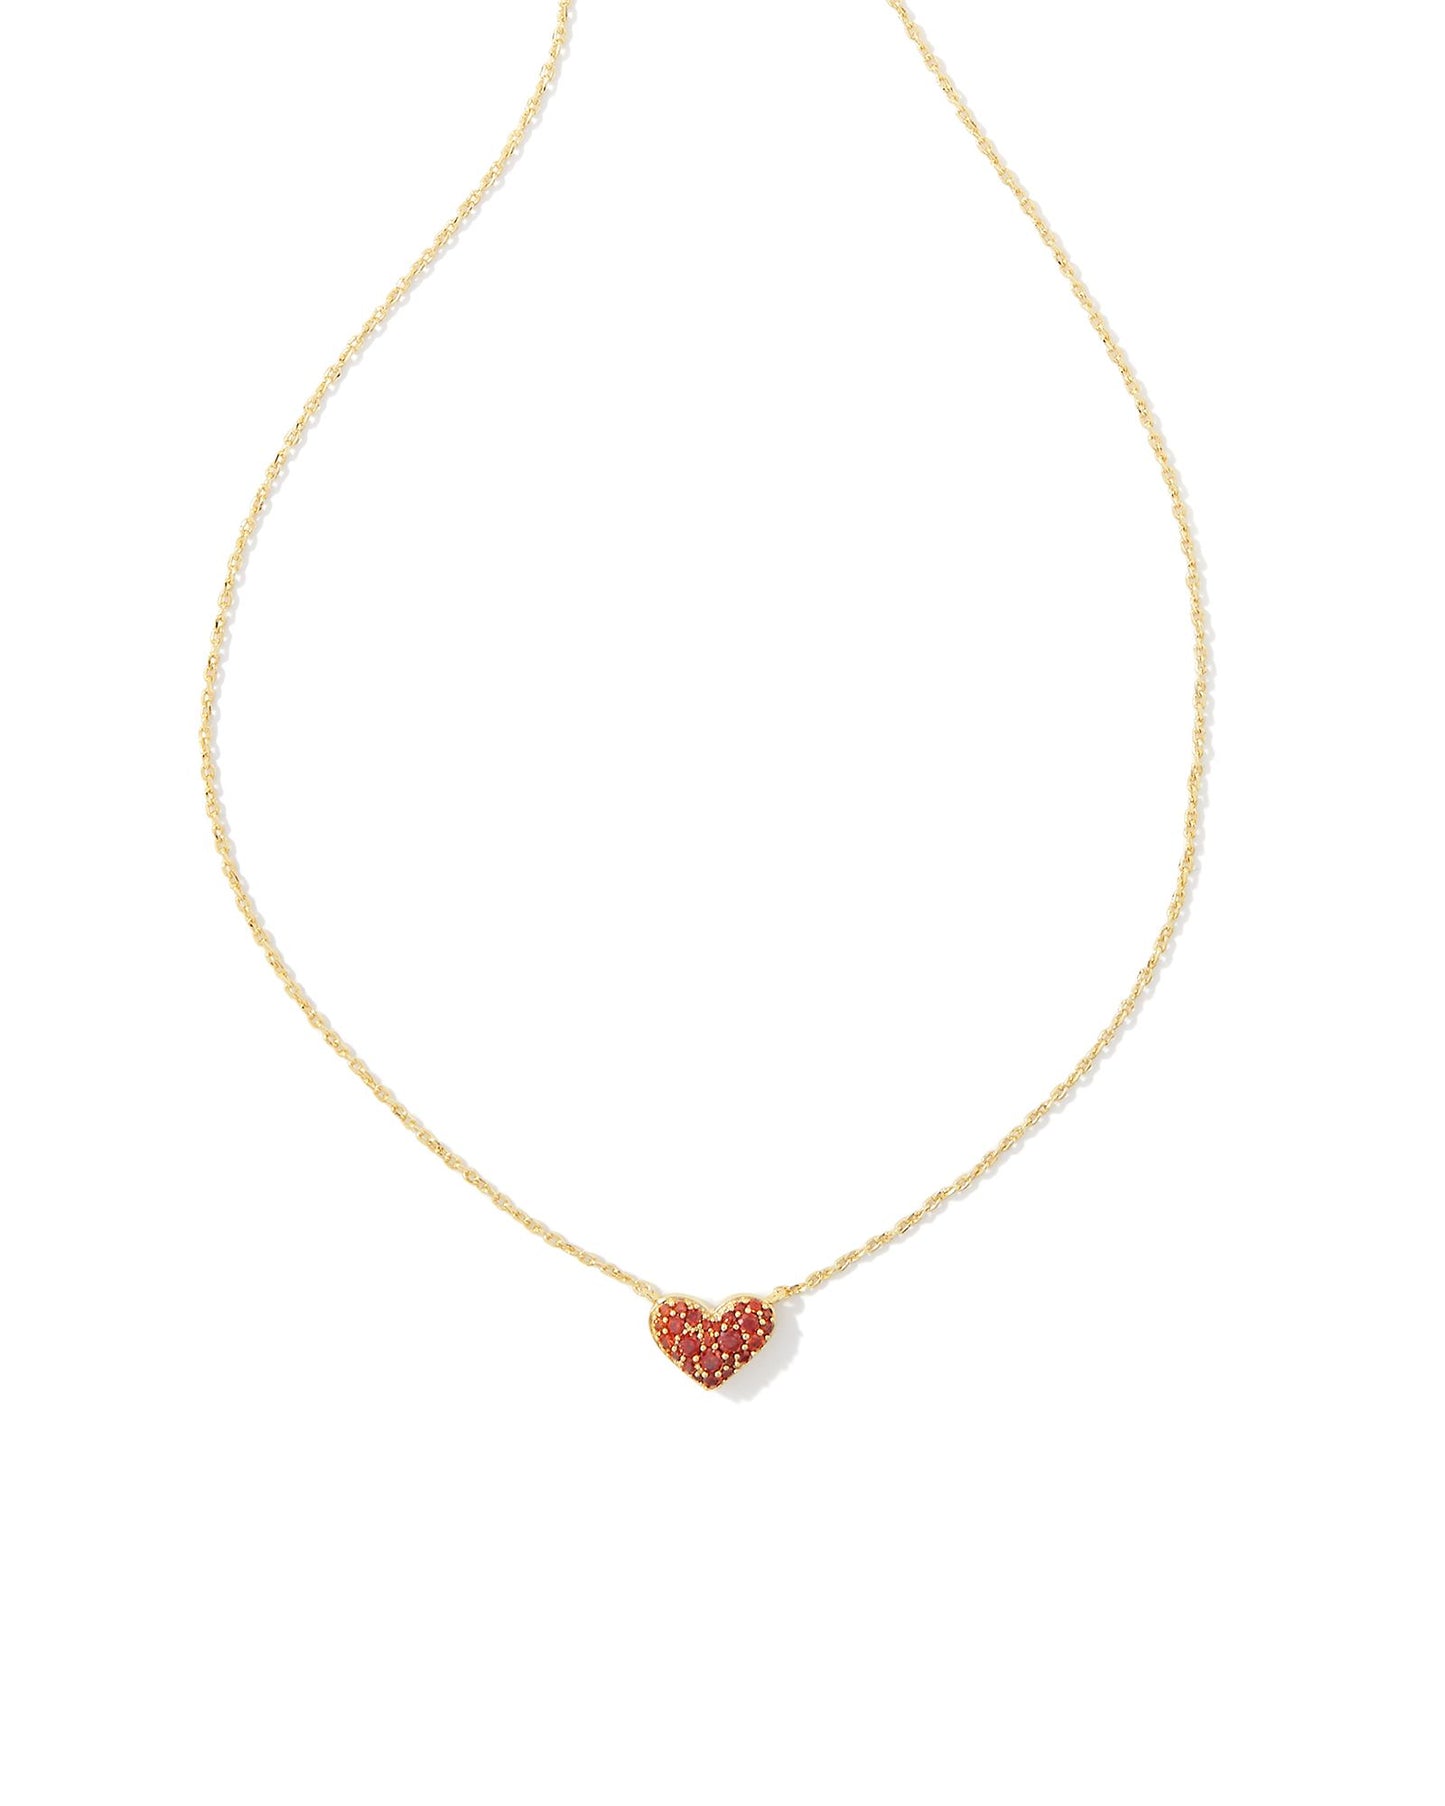 Ari Gold Pave Crystal Heart Necklace